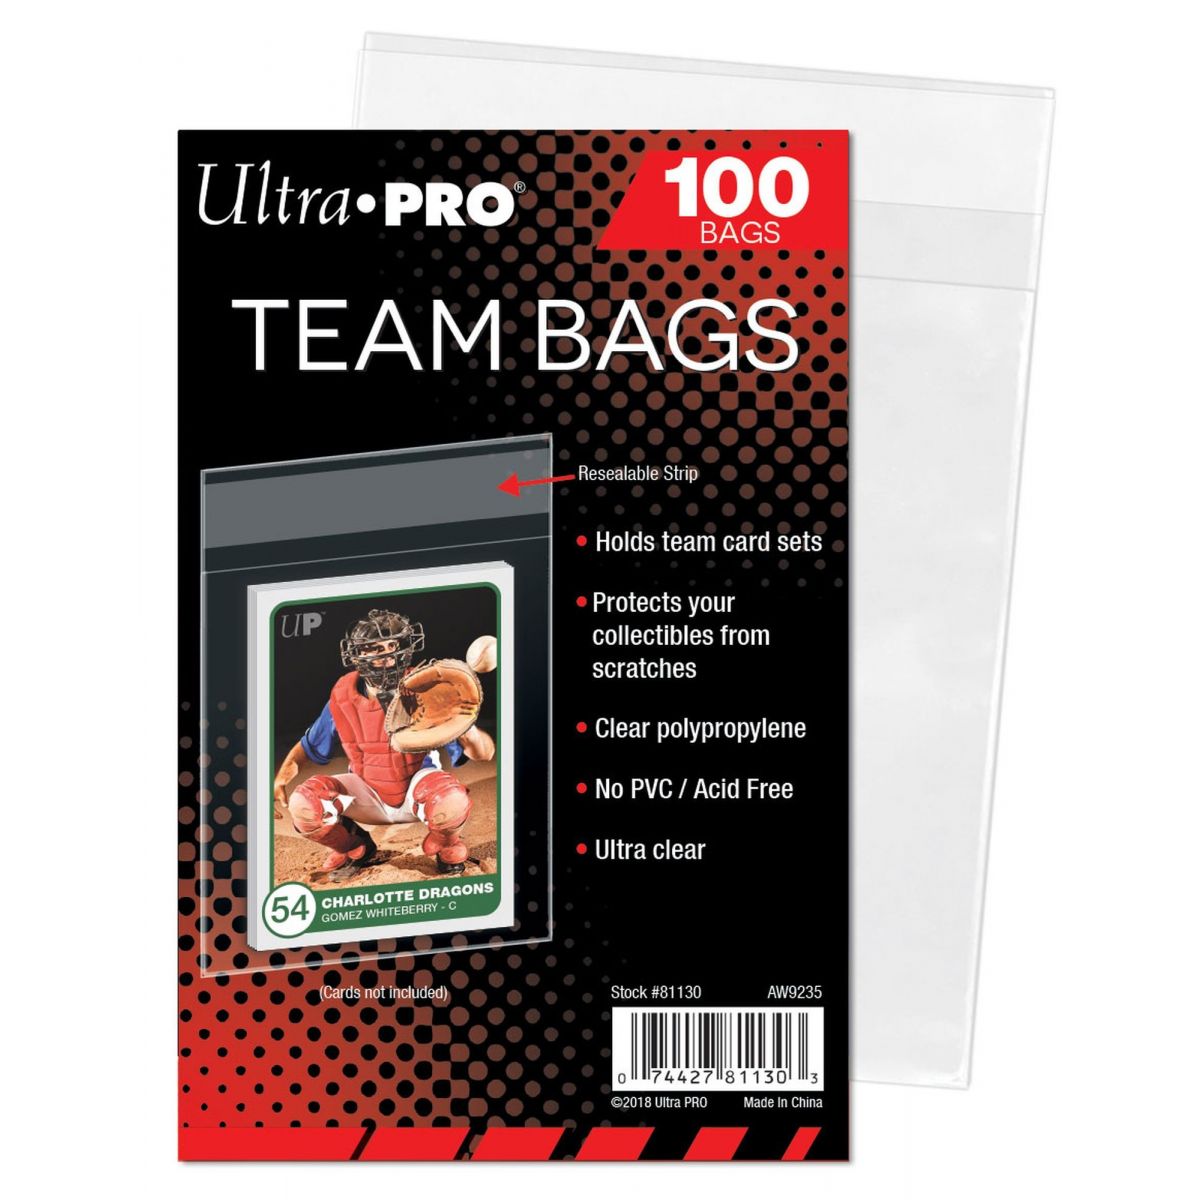 Item Ultra Pro - Team Bags - Resealable - Top Loader Resealable Sleeves (100)